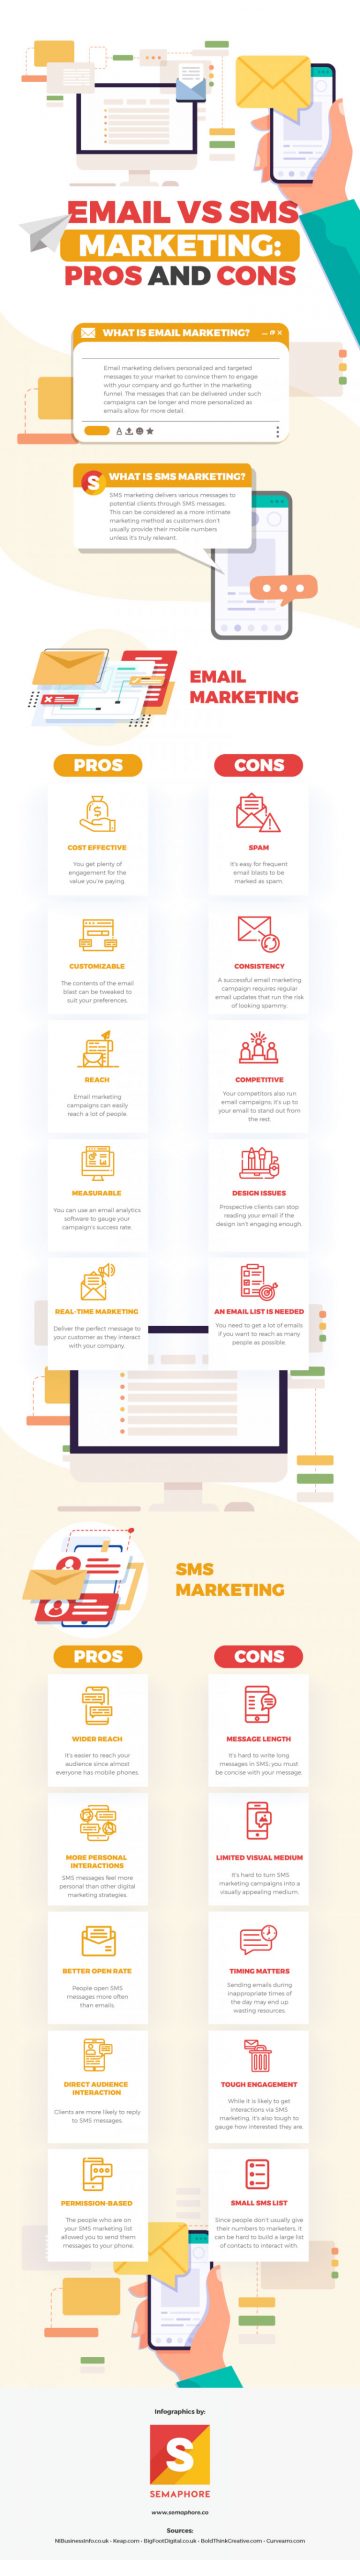 email vs sms marketing pros and cons infographic